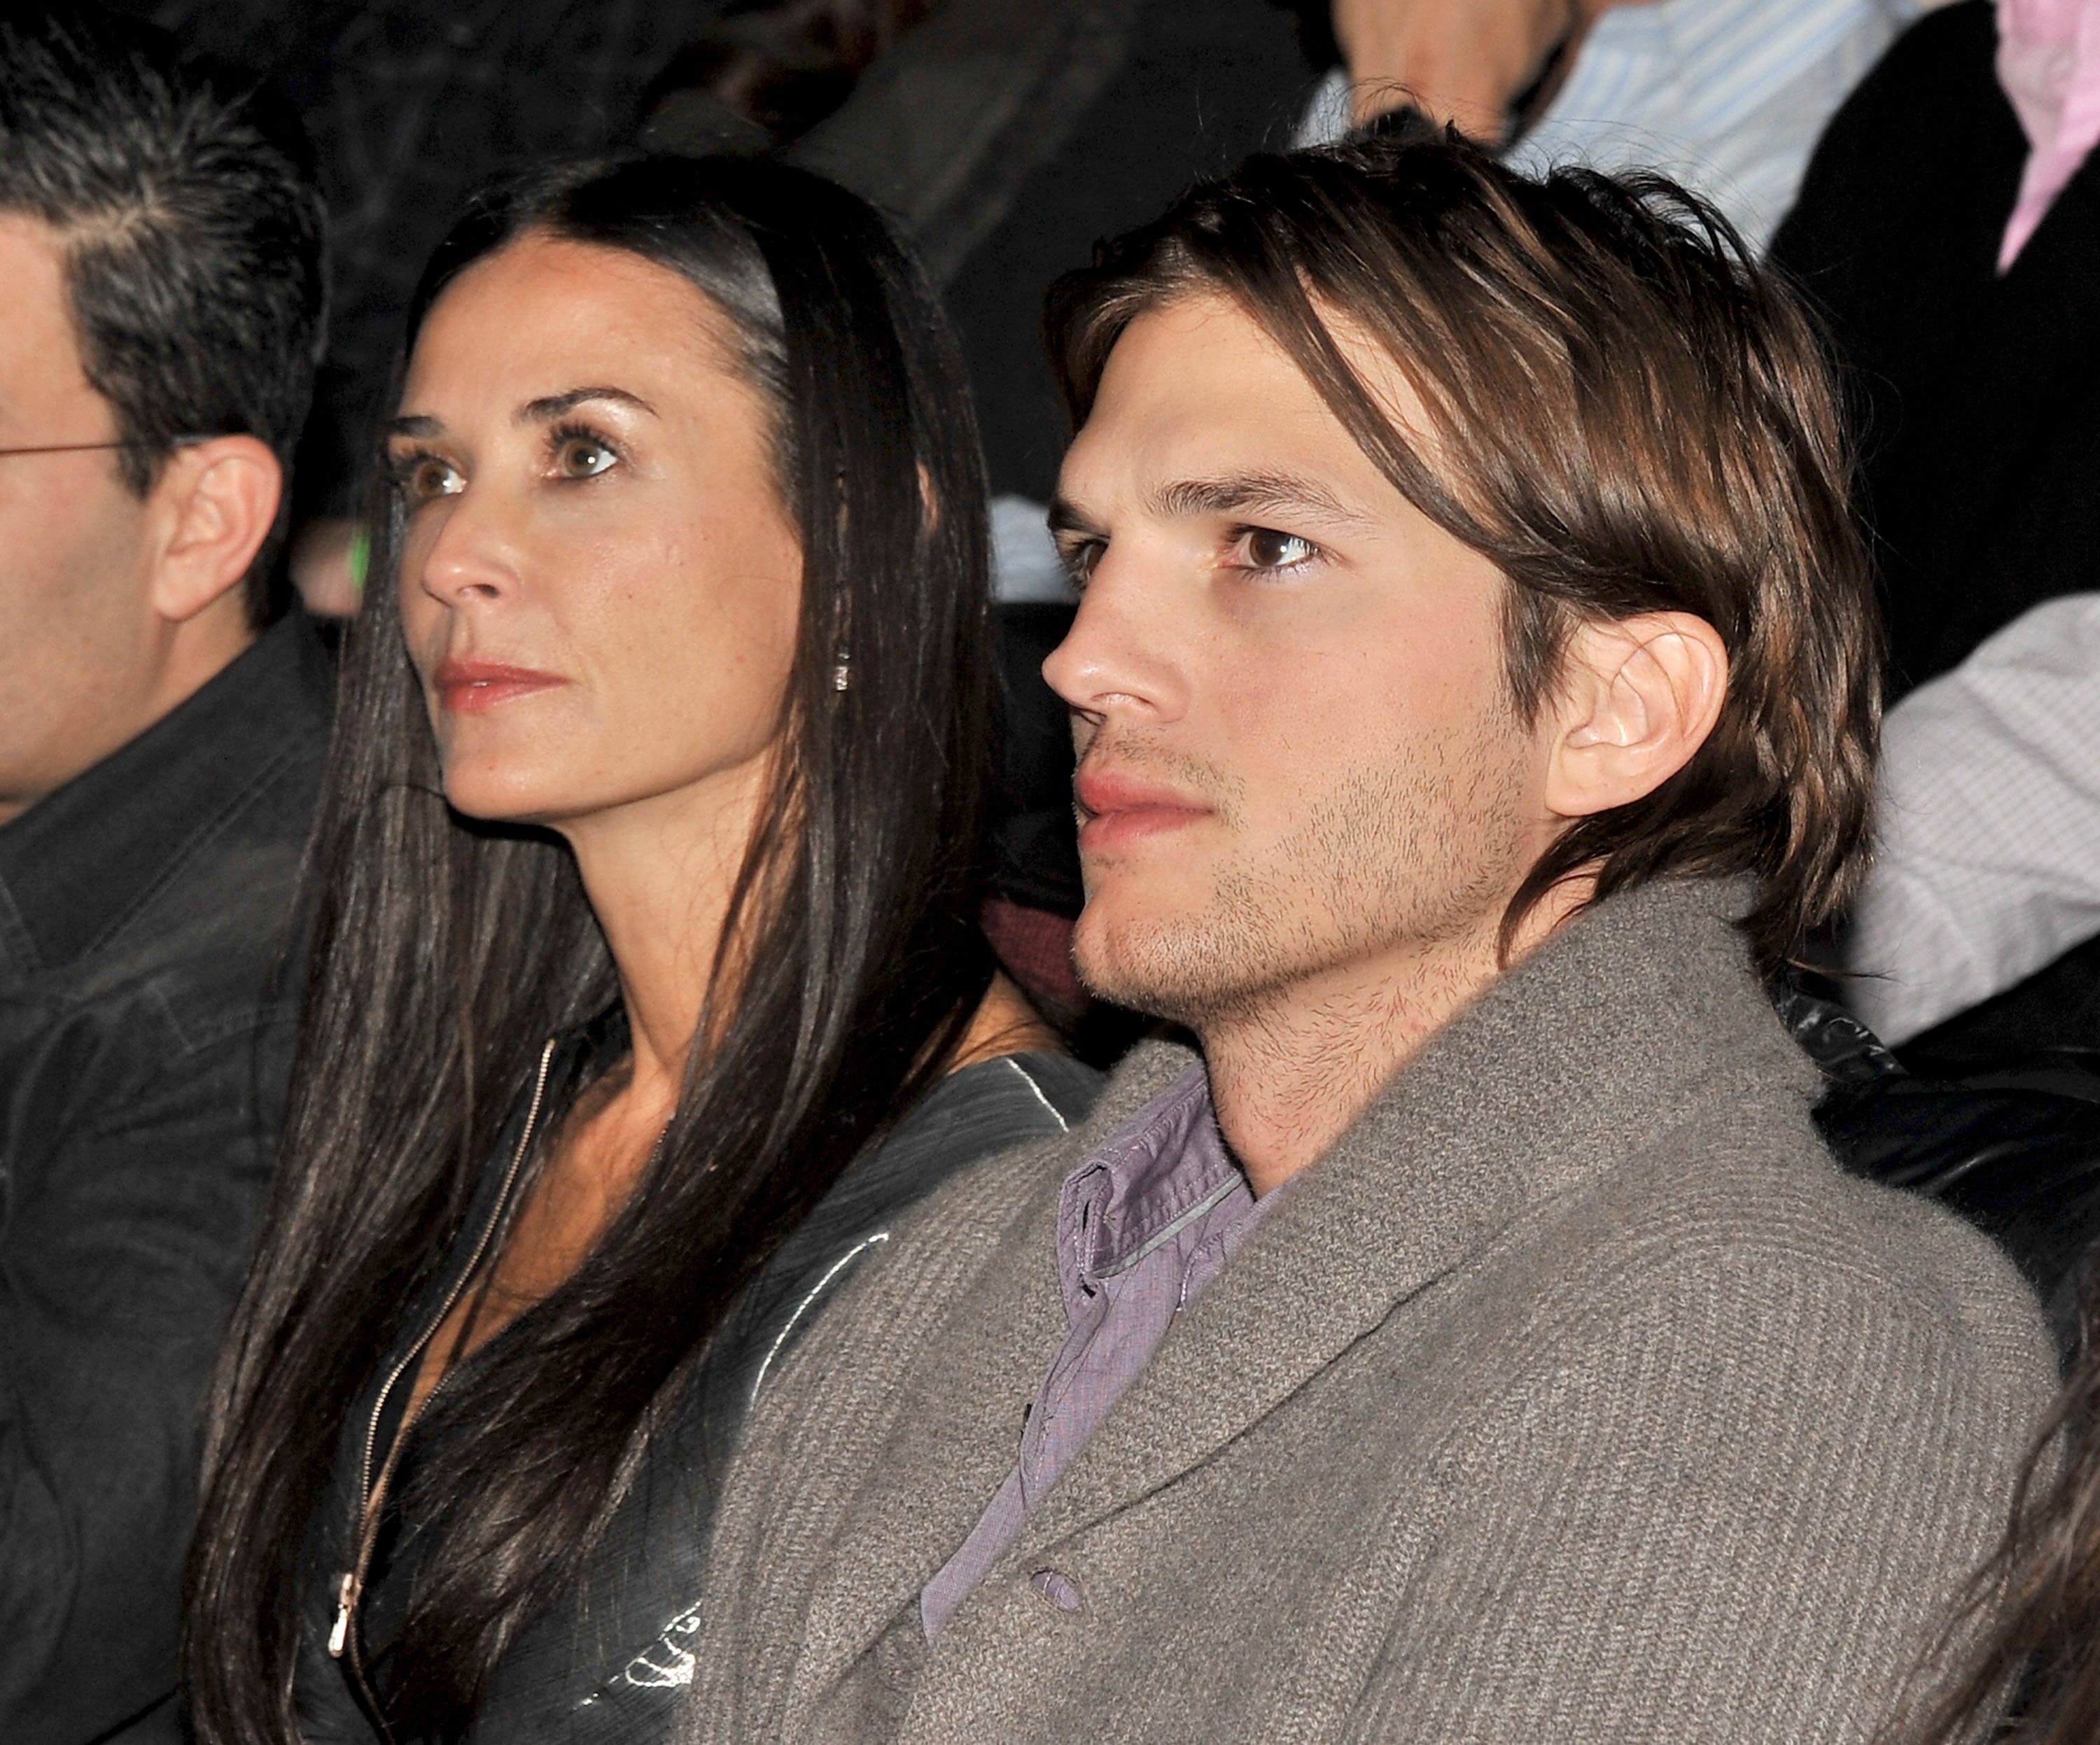 Demi Moore and Ashton Kutcher at the "Margin Call" premiere during the Sundance Film Festival on January 25, 2011, in Park City, Utah. | Source: Getty Images